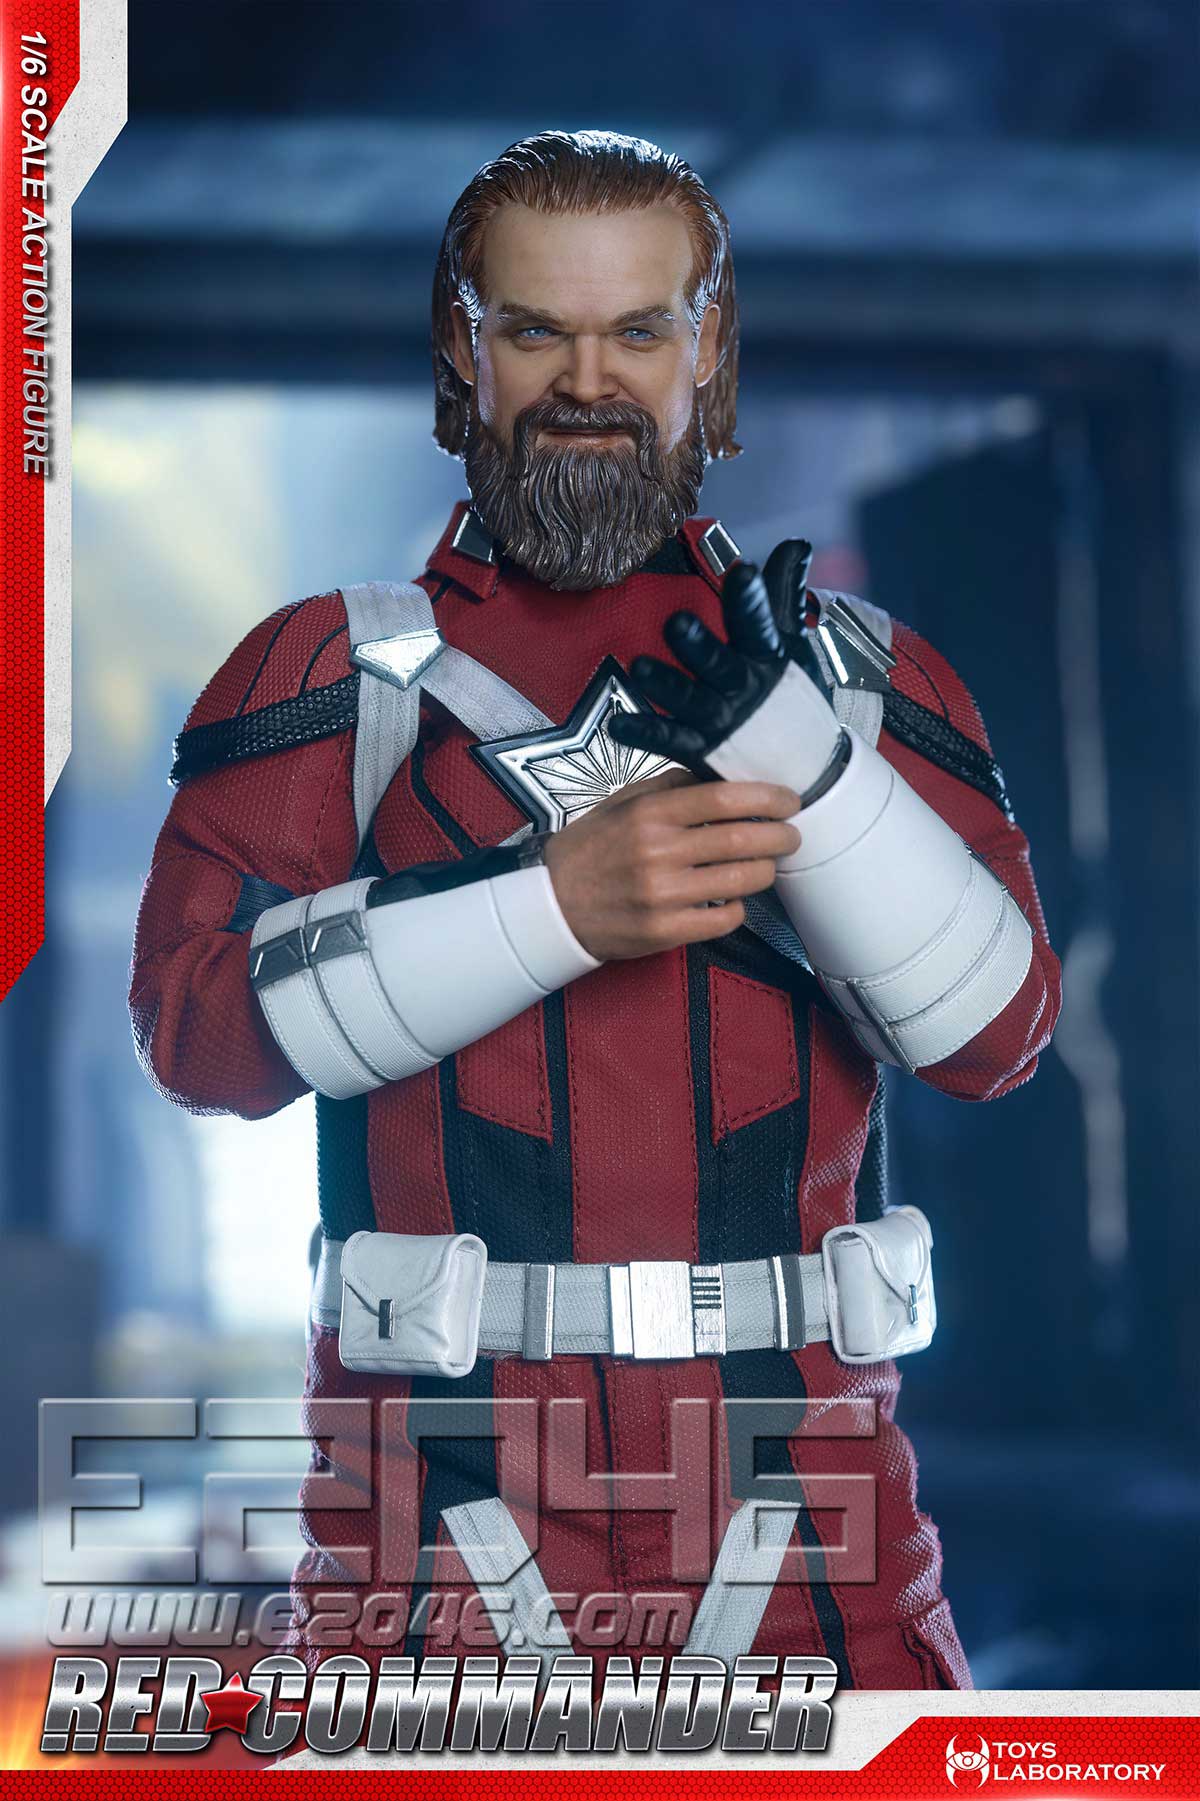 Red Commander (DOLL)